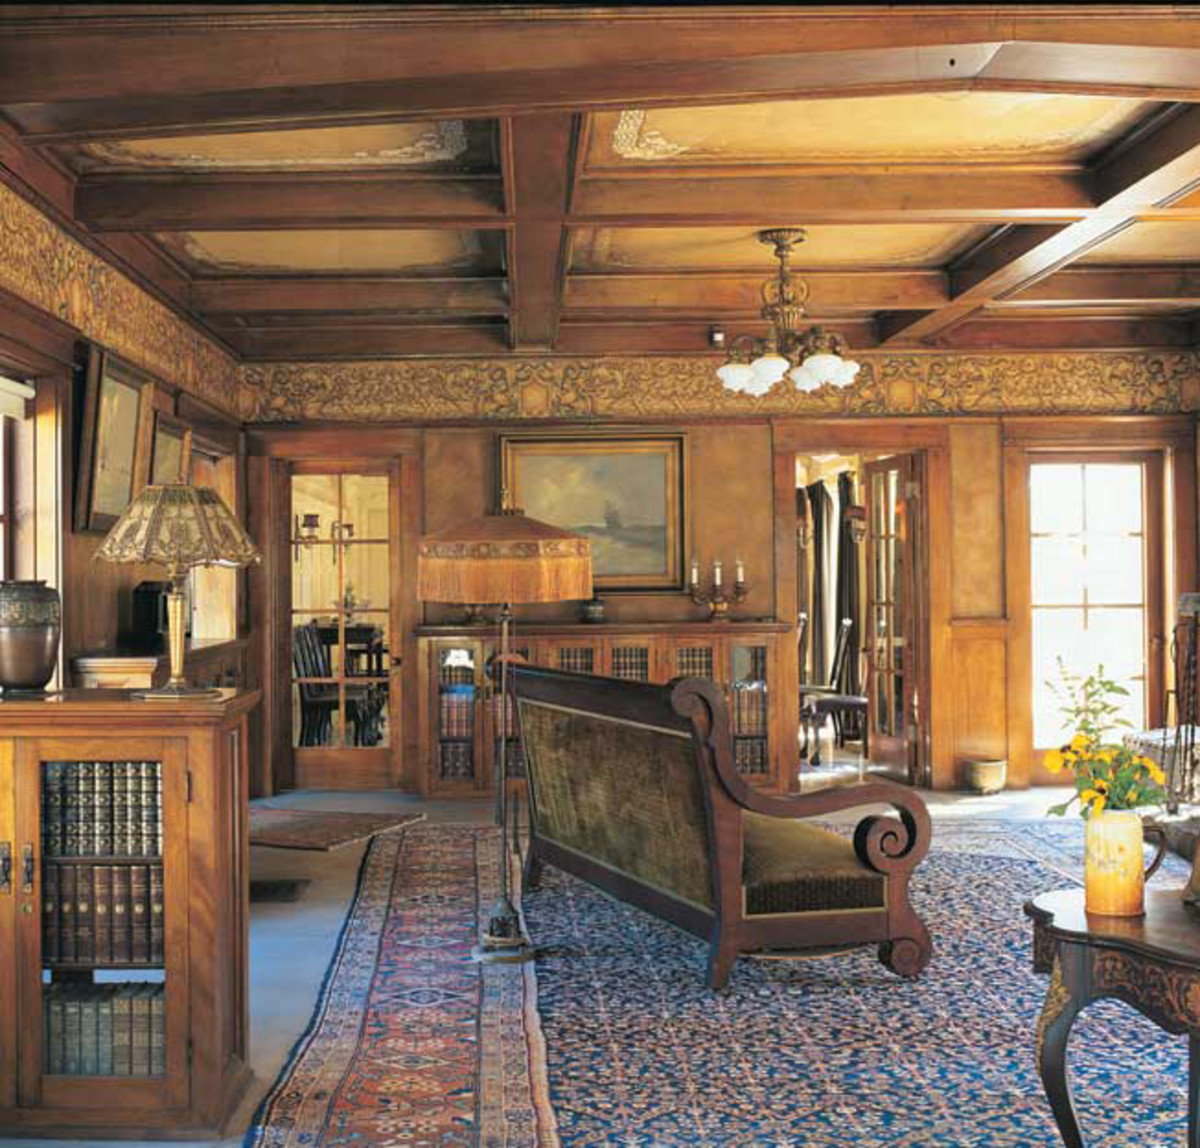 An original beamed-ceiling decoration scheme survives at the Lanterman House in California. below Narrow borders along beams coordinate with the pendant frieze in a revival room.